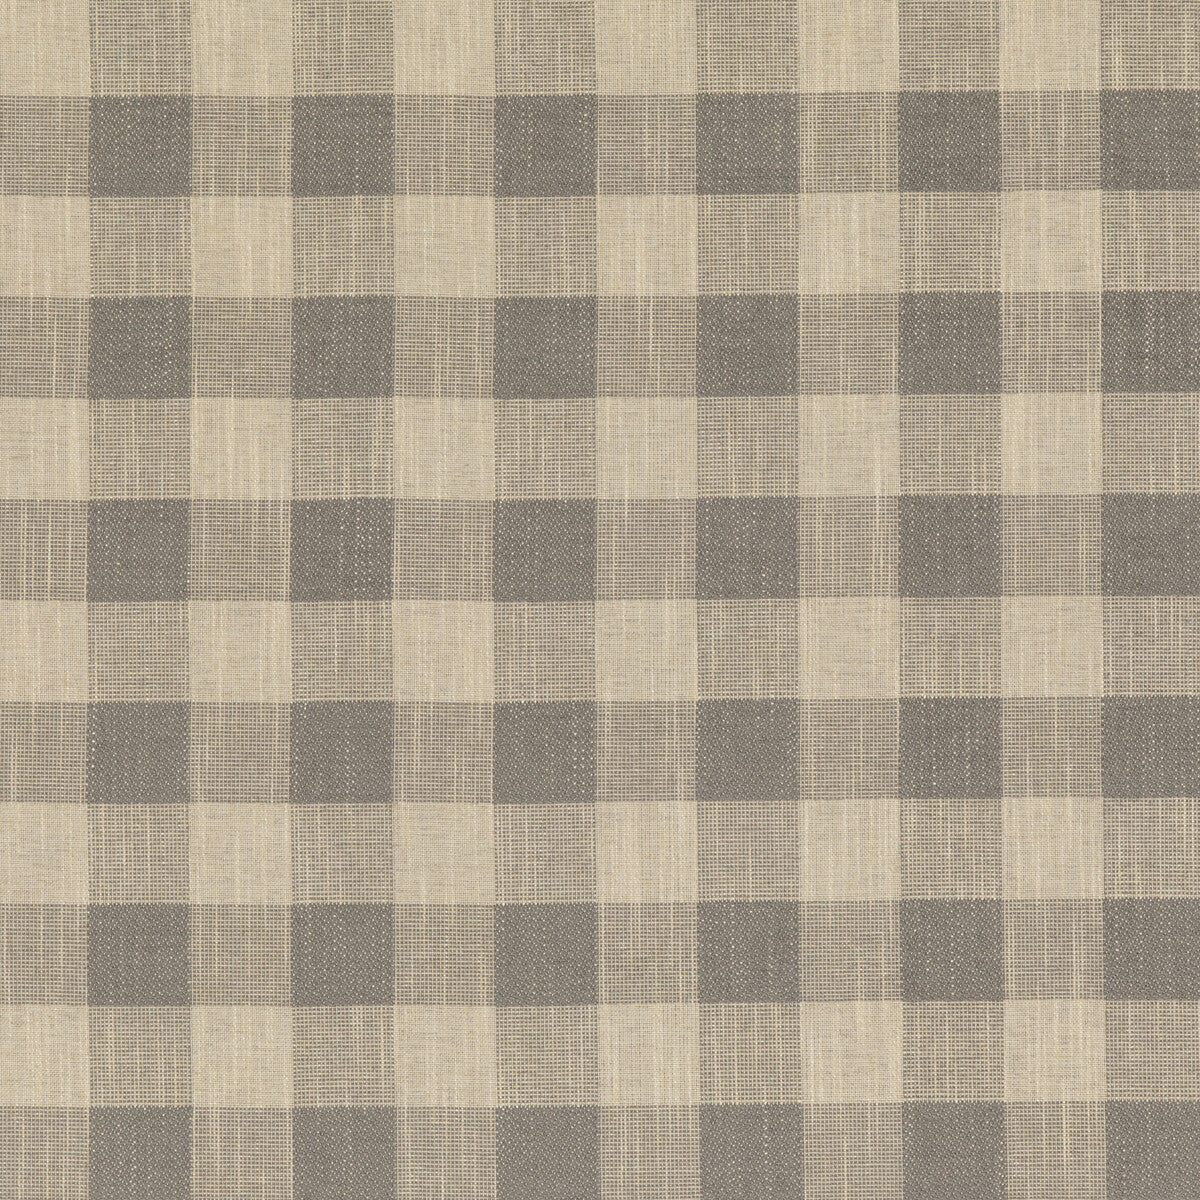 Block Check fabric in pebble color - pattern PF50490.930.0 - by Baker Lifestyle in the Block Weaves collection